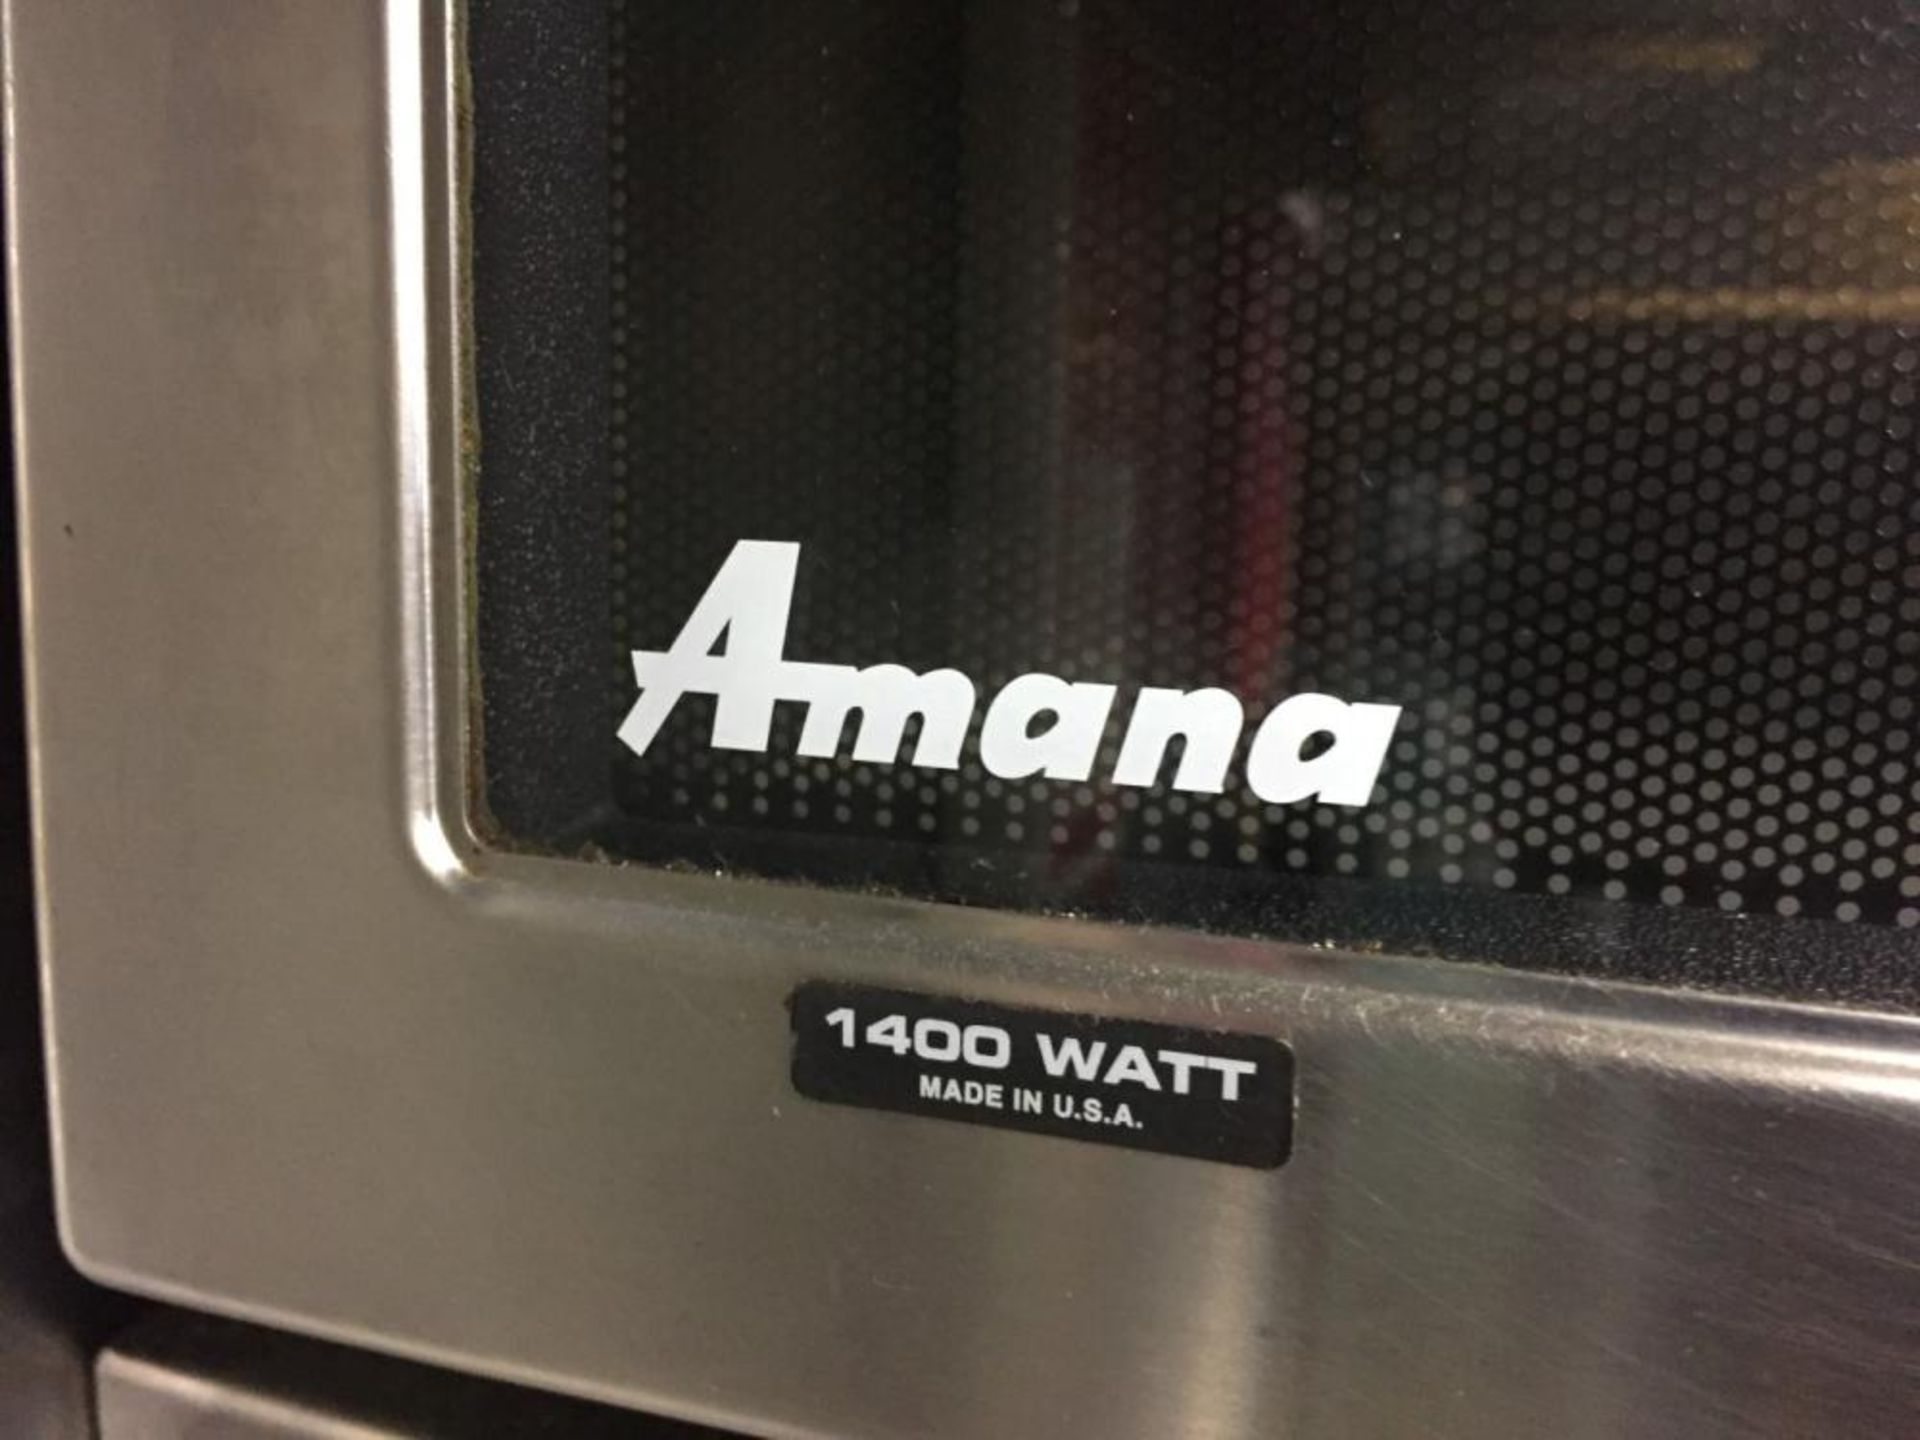 1 x AMANA Commercial 1400 Watt Microwave Oven - Stainless Steel - Dimensions: W42 x D50 x H34cm - Ma - Image 3 of 4